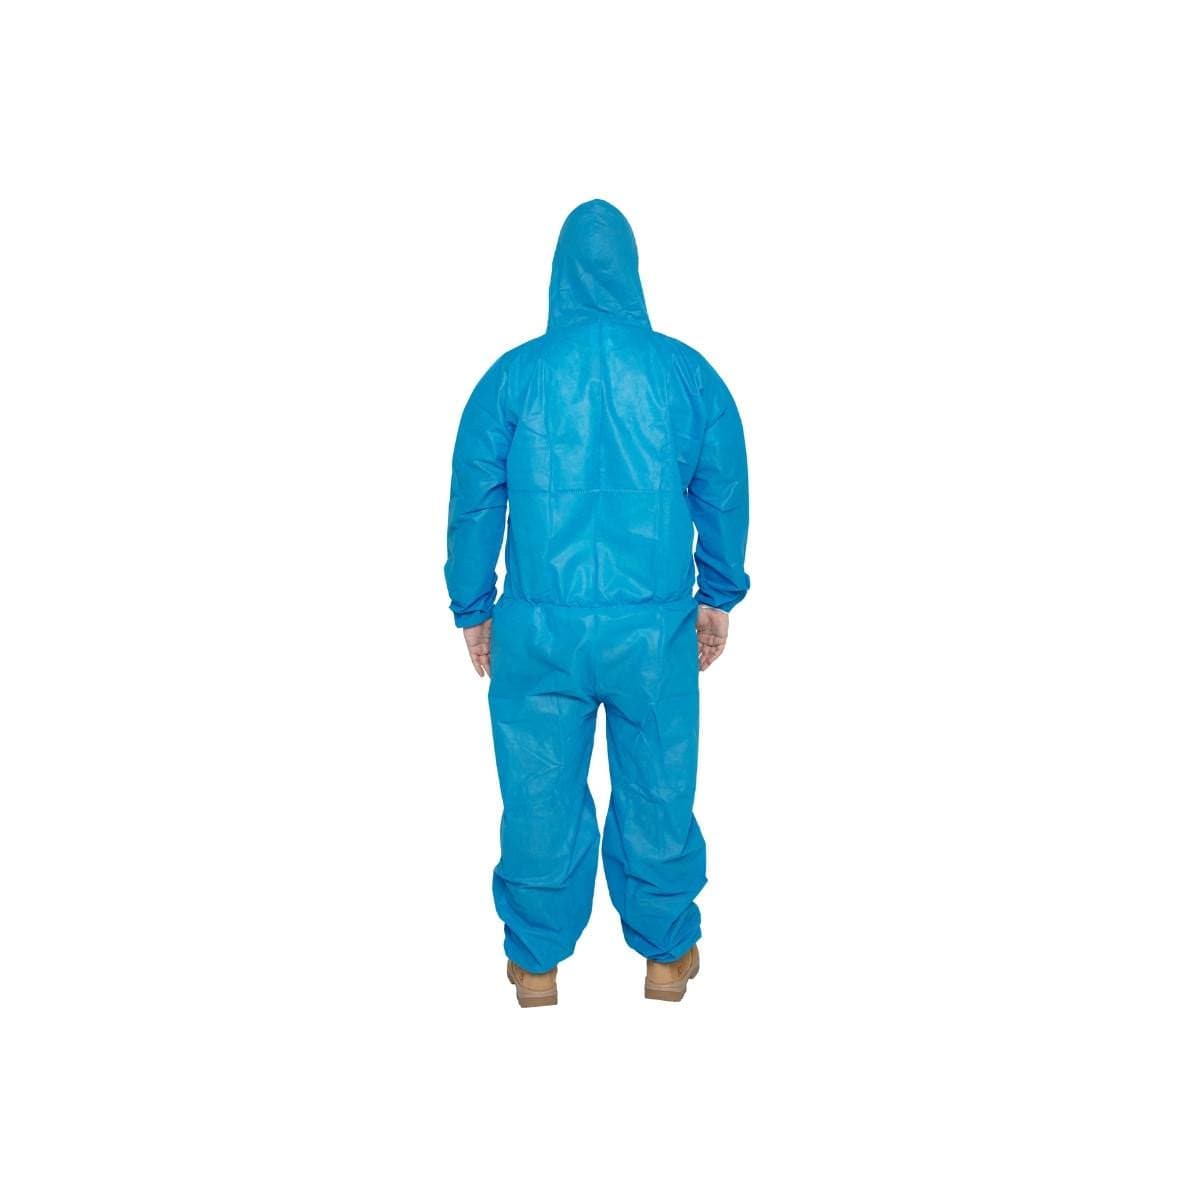 Disposable Coveralls: Reliable Protection